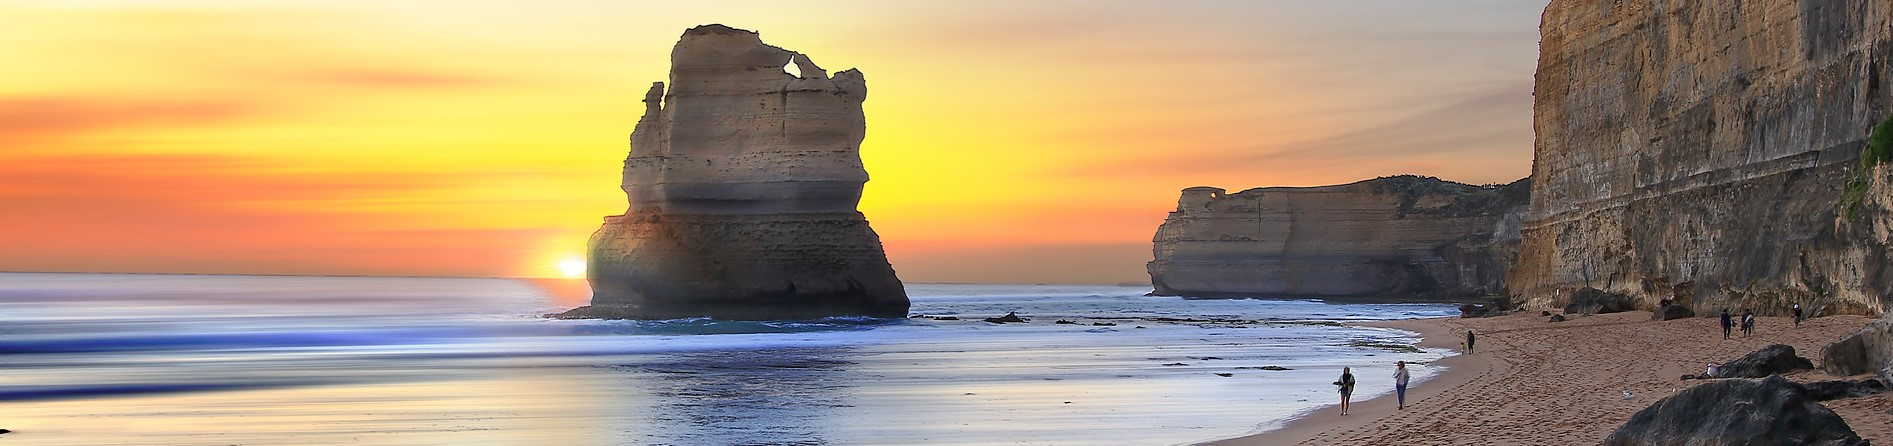 How to Enjoy the Great Ocean Road after Quarantine